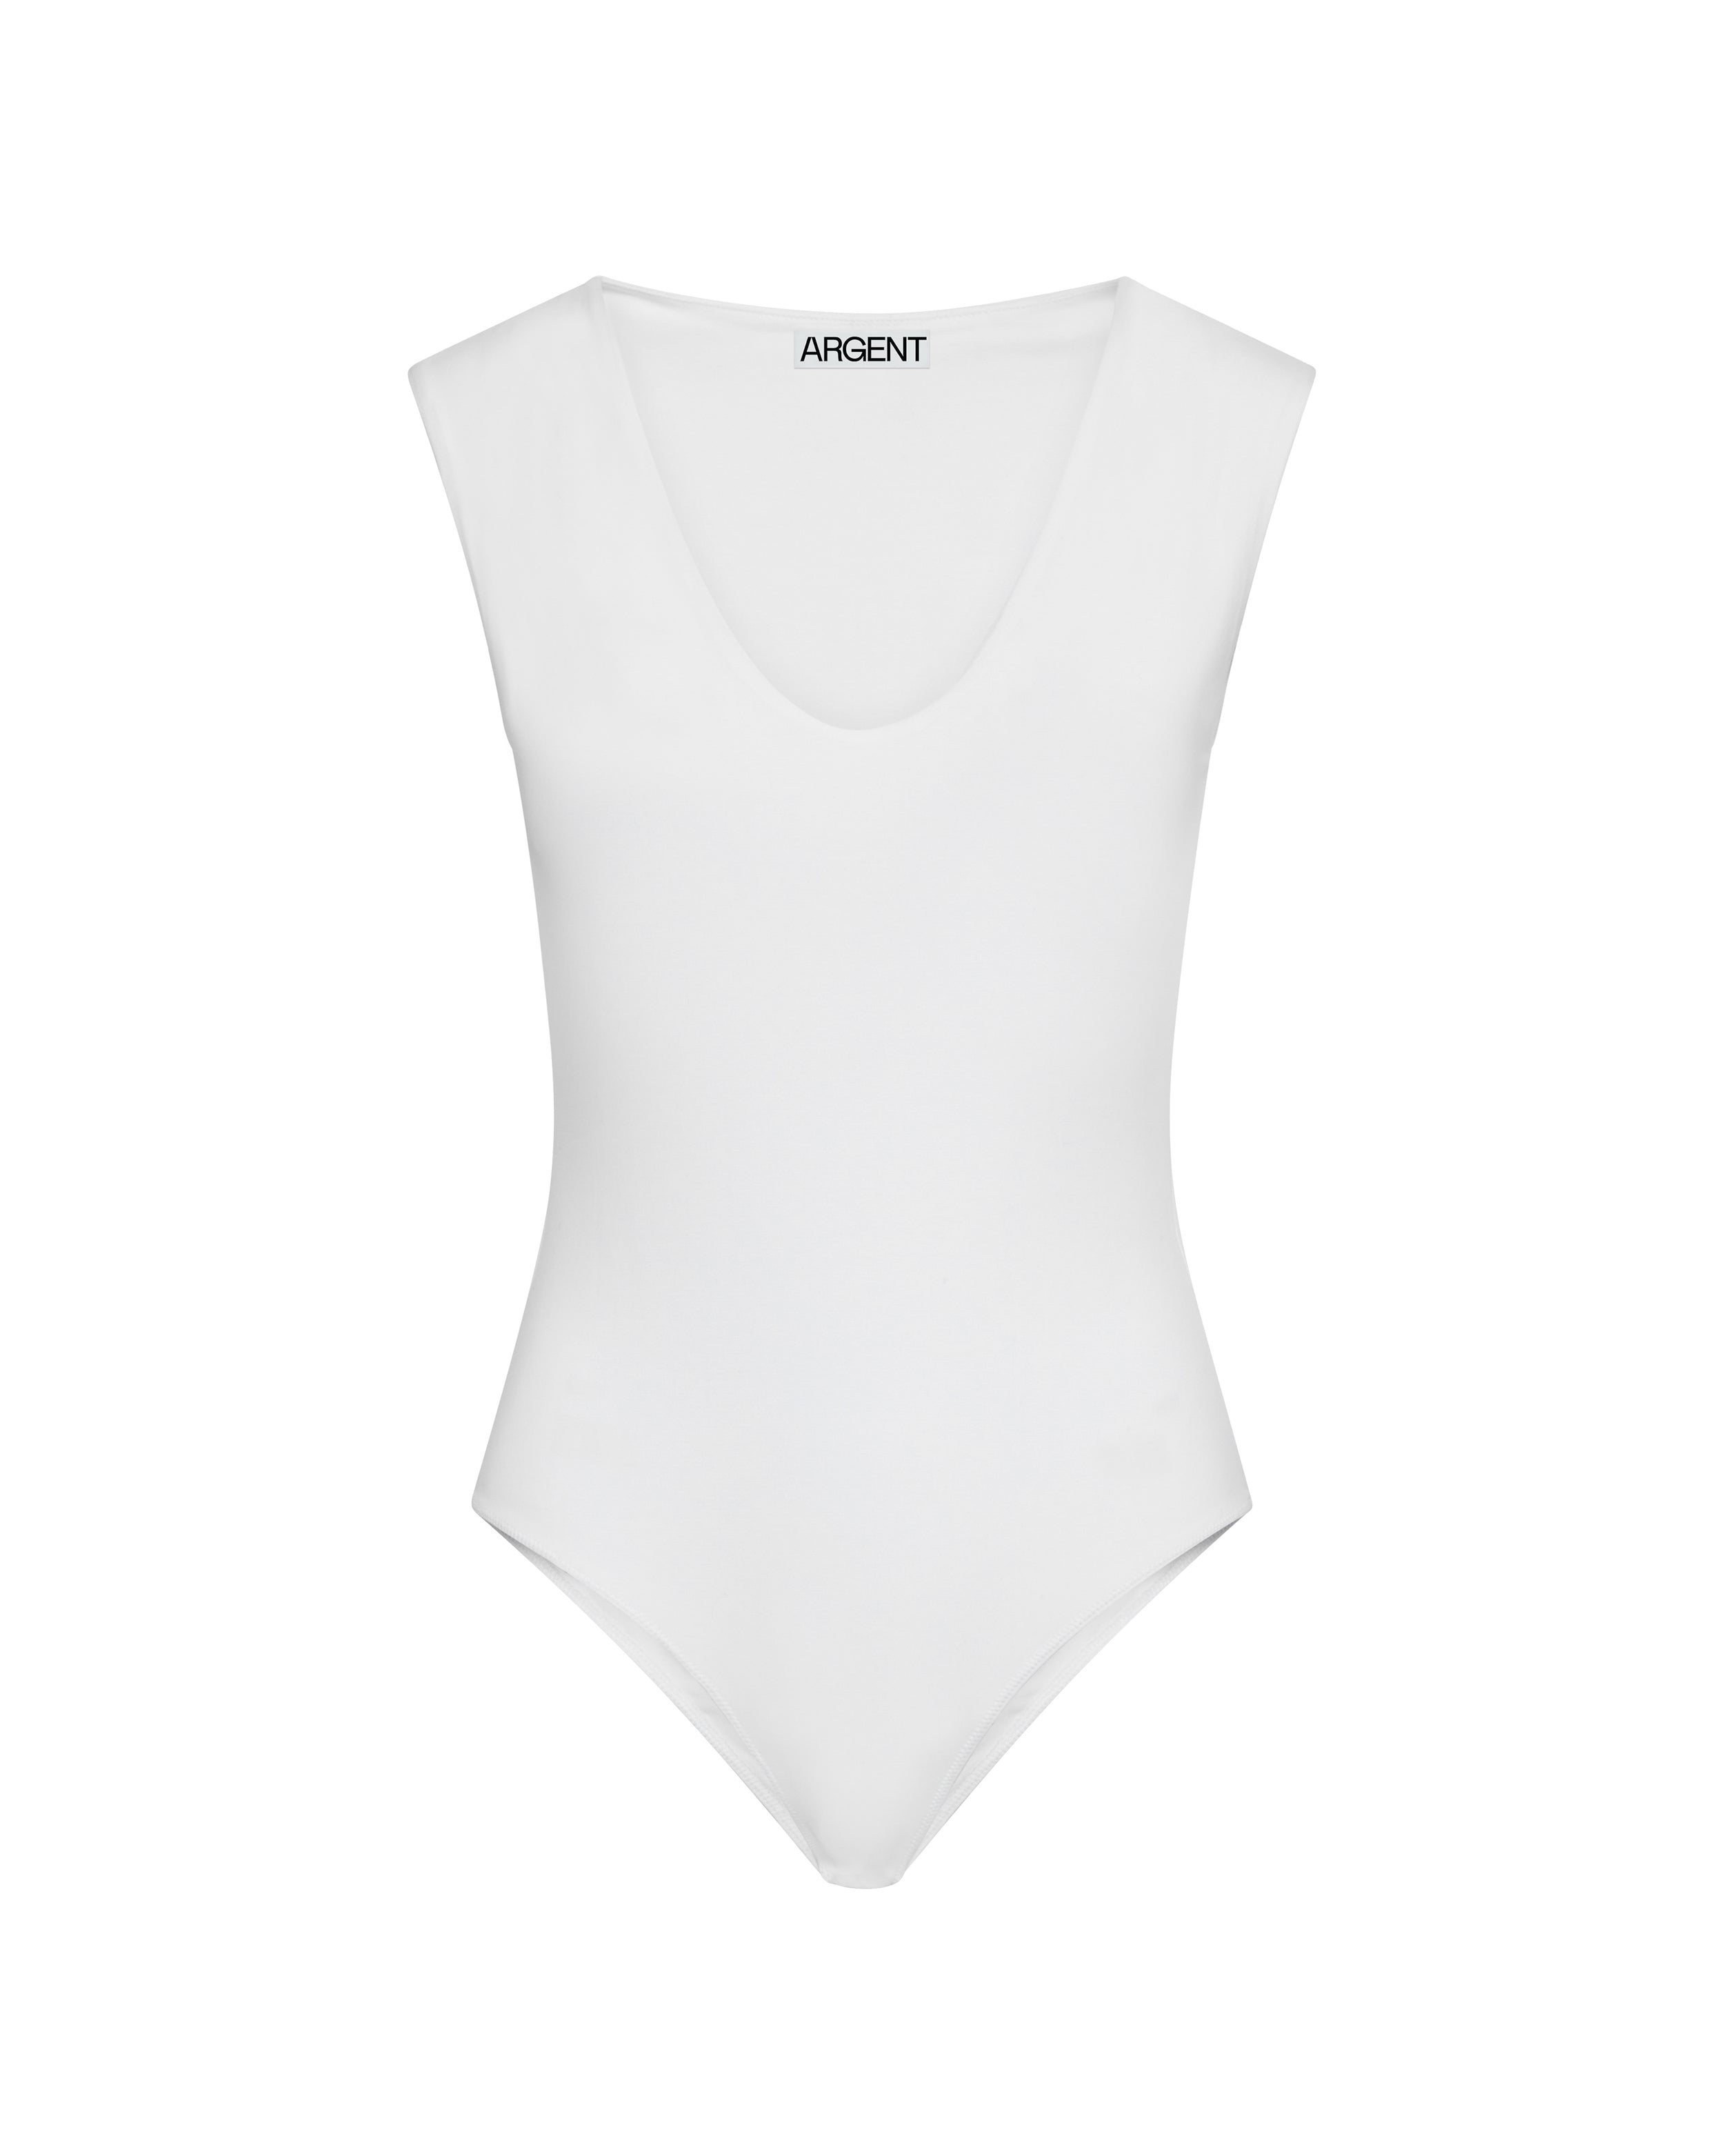 ALL THE WAYS Malina Deep V Bodysuit in White